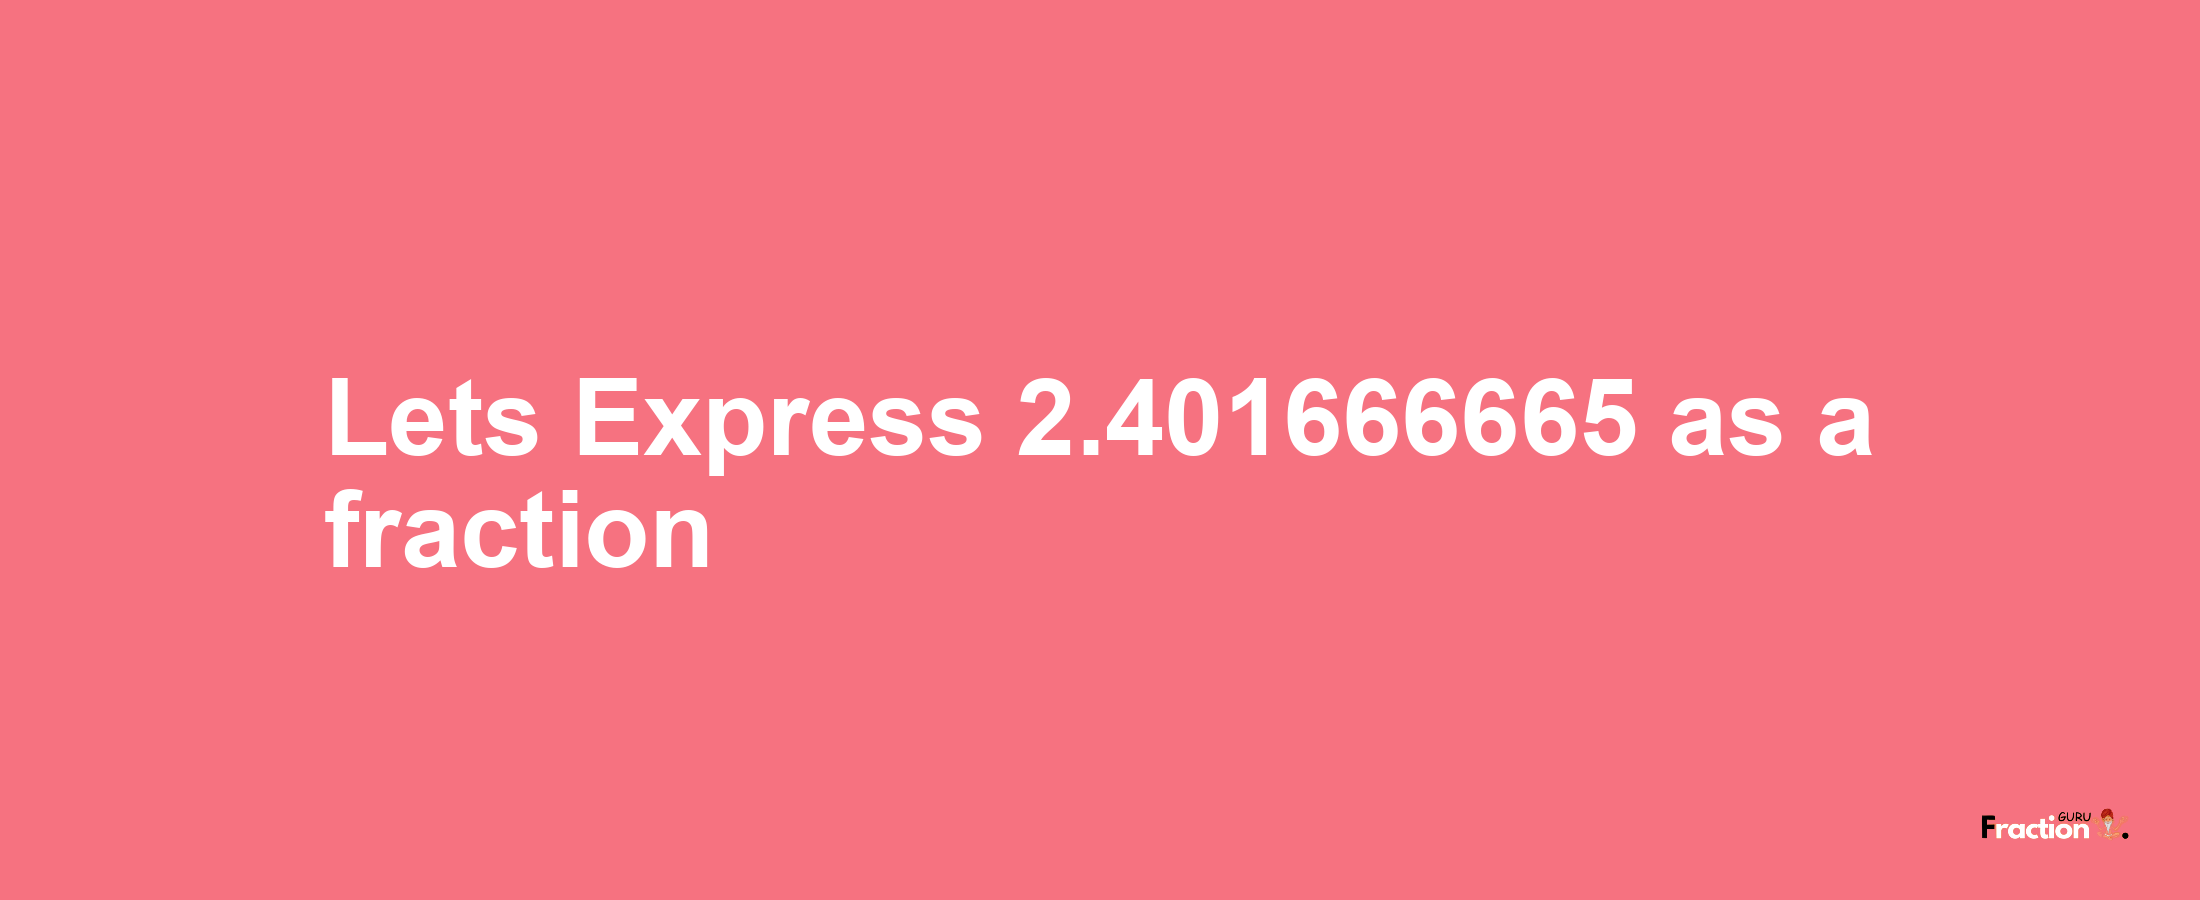 Lets Express 2.401666665 as afraction